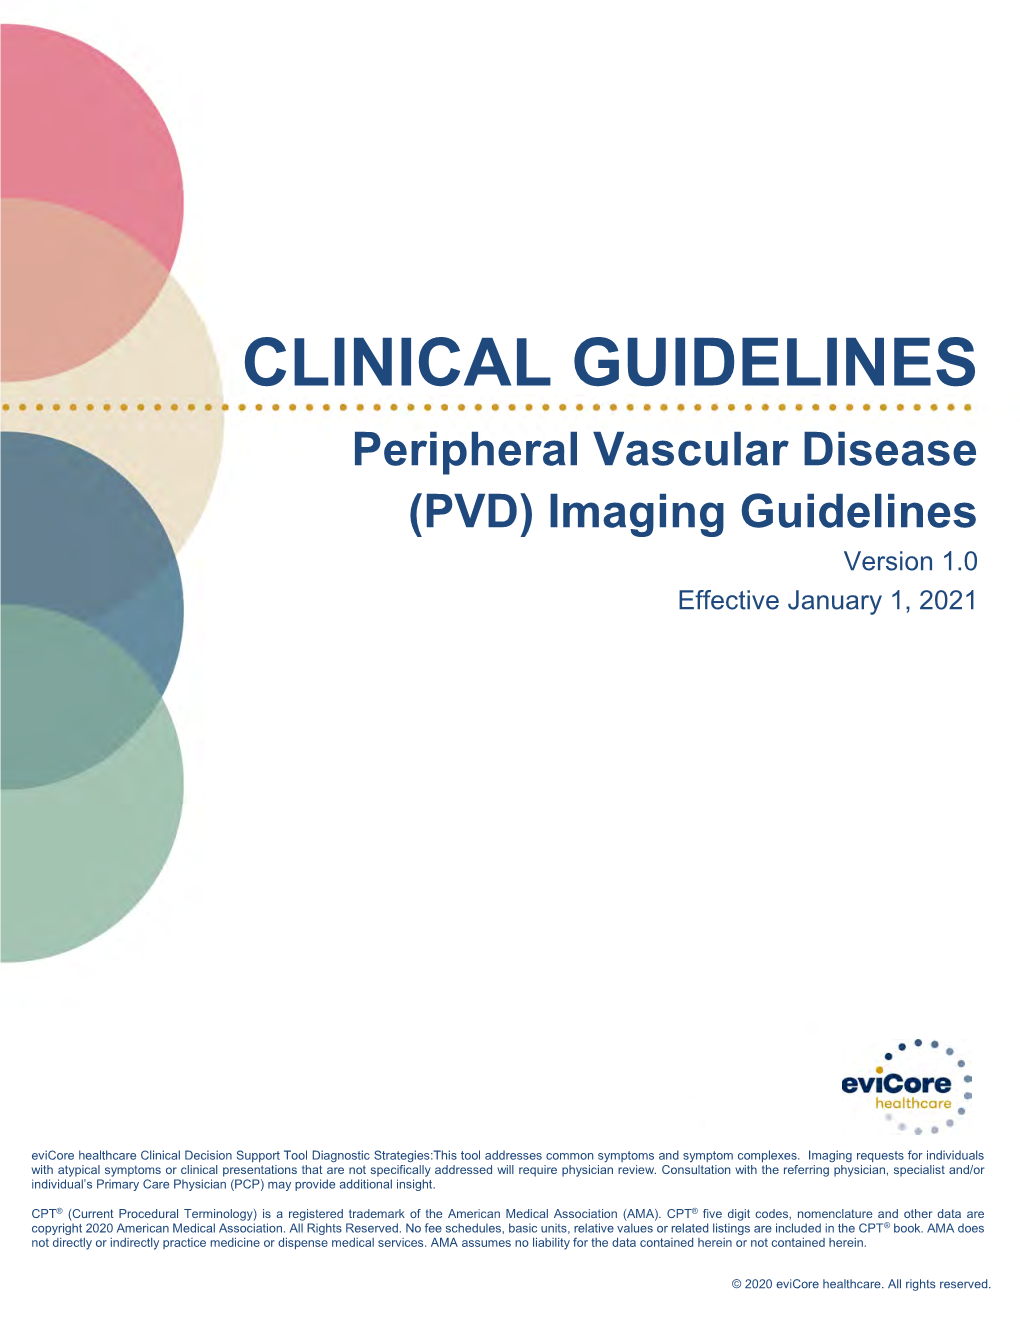 Evicore PVD Imaging Guidelines